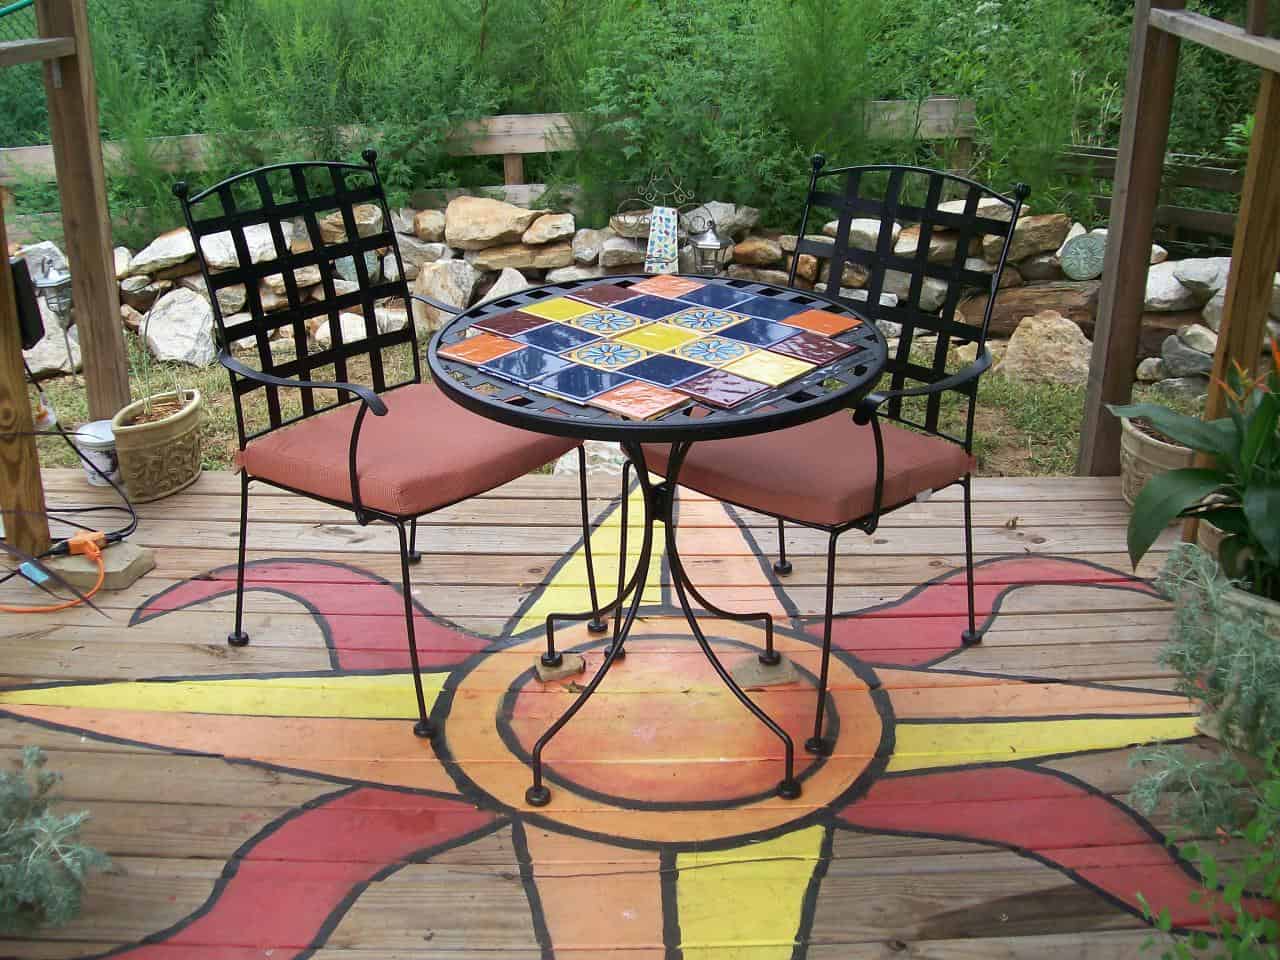 Paint a pattern on your patio floor for an interesting twist that will be unexpected.